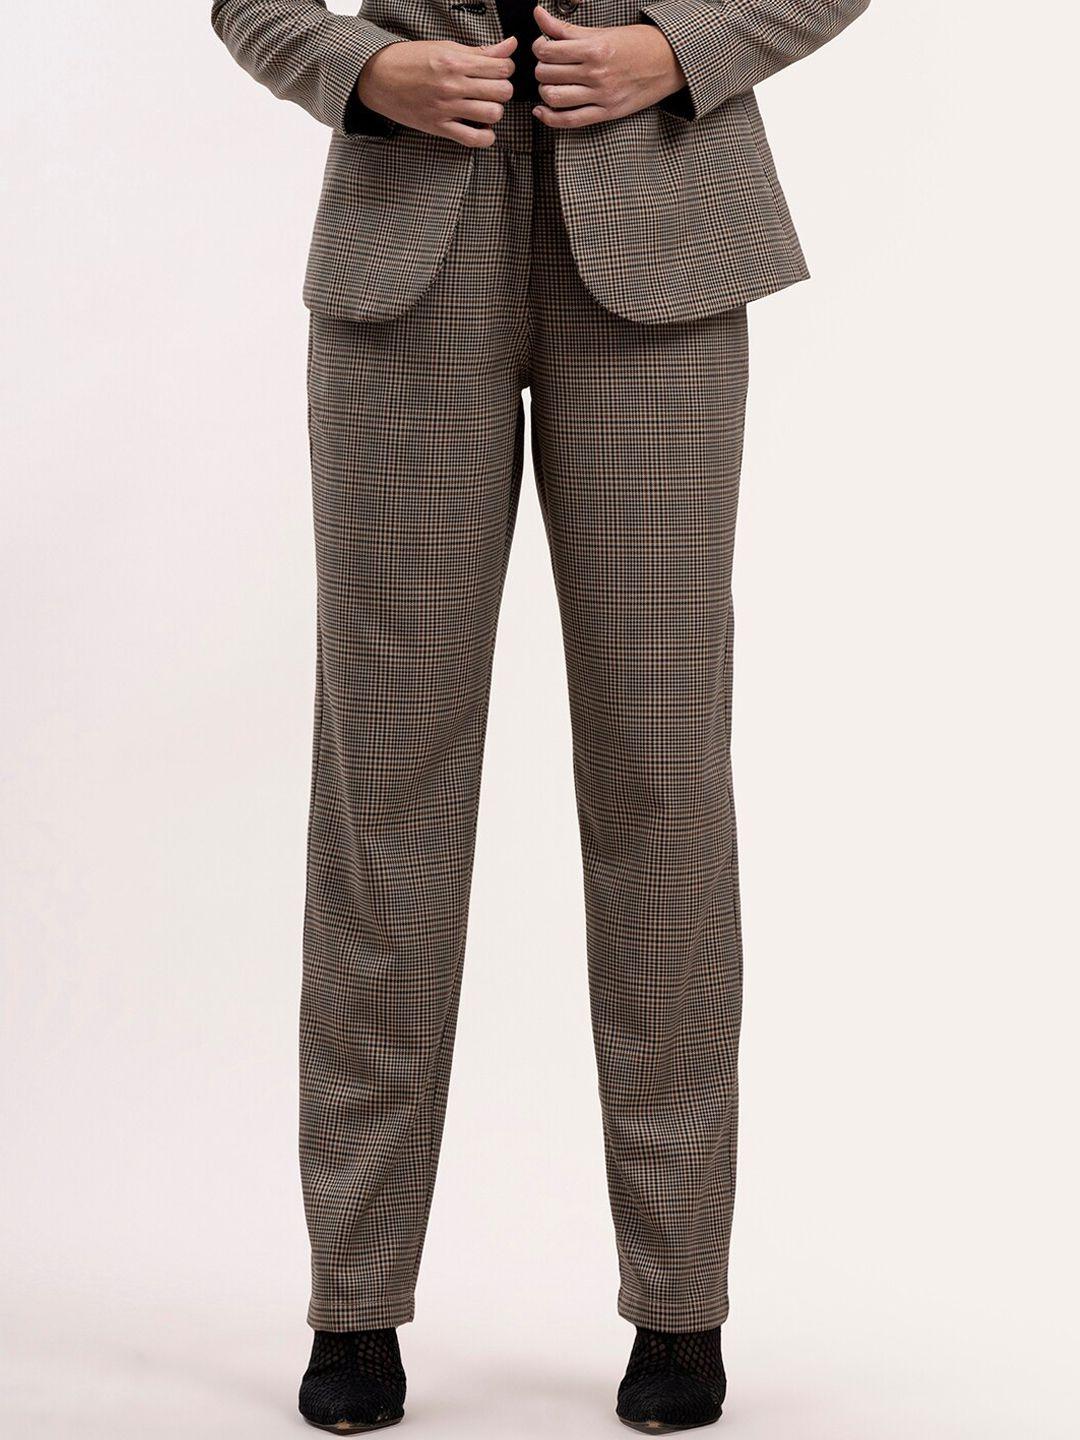 FableStreet Women Brown & Black Checked Cotton Formal Trousers